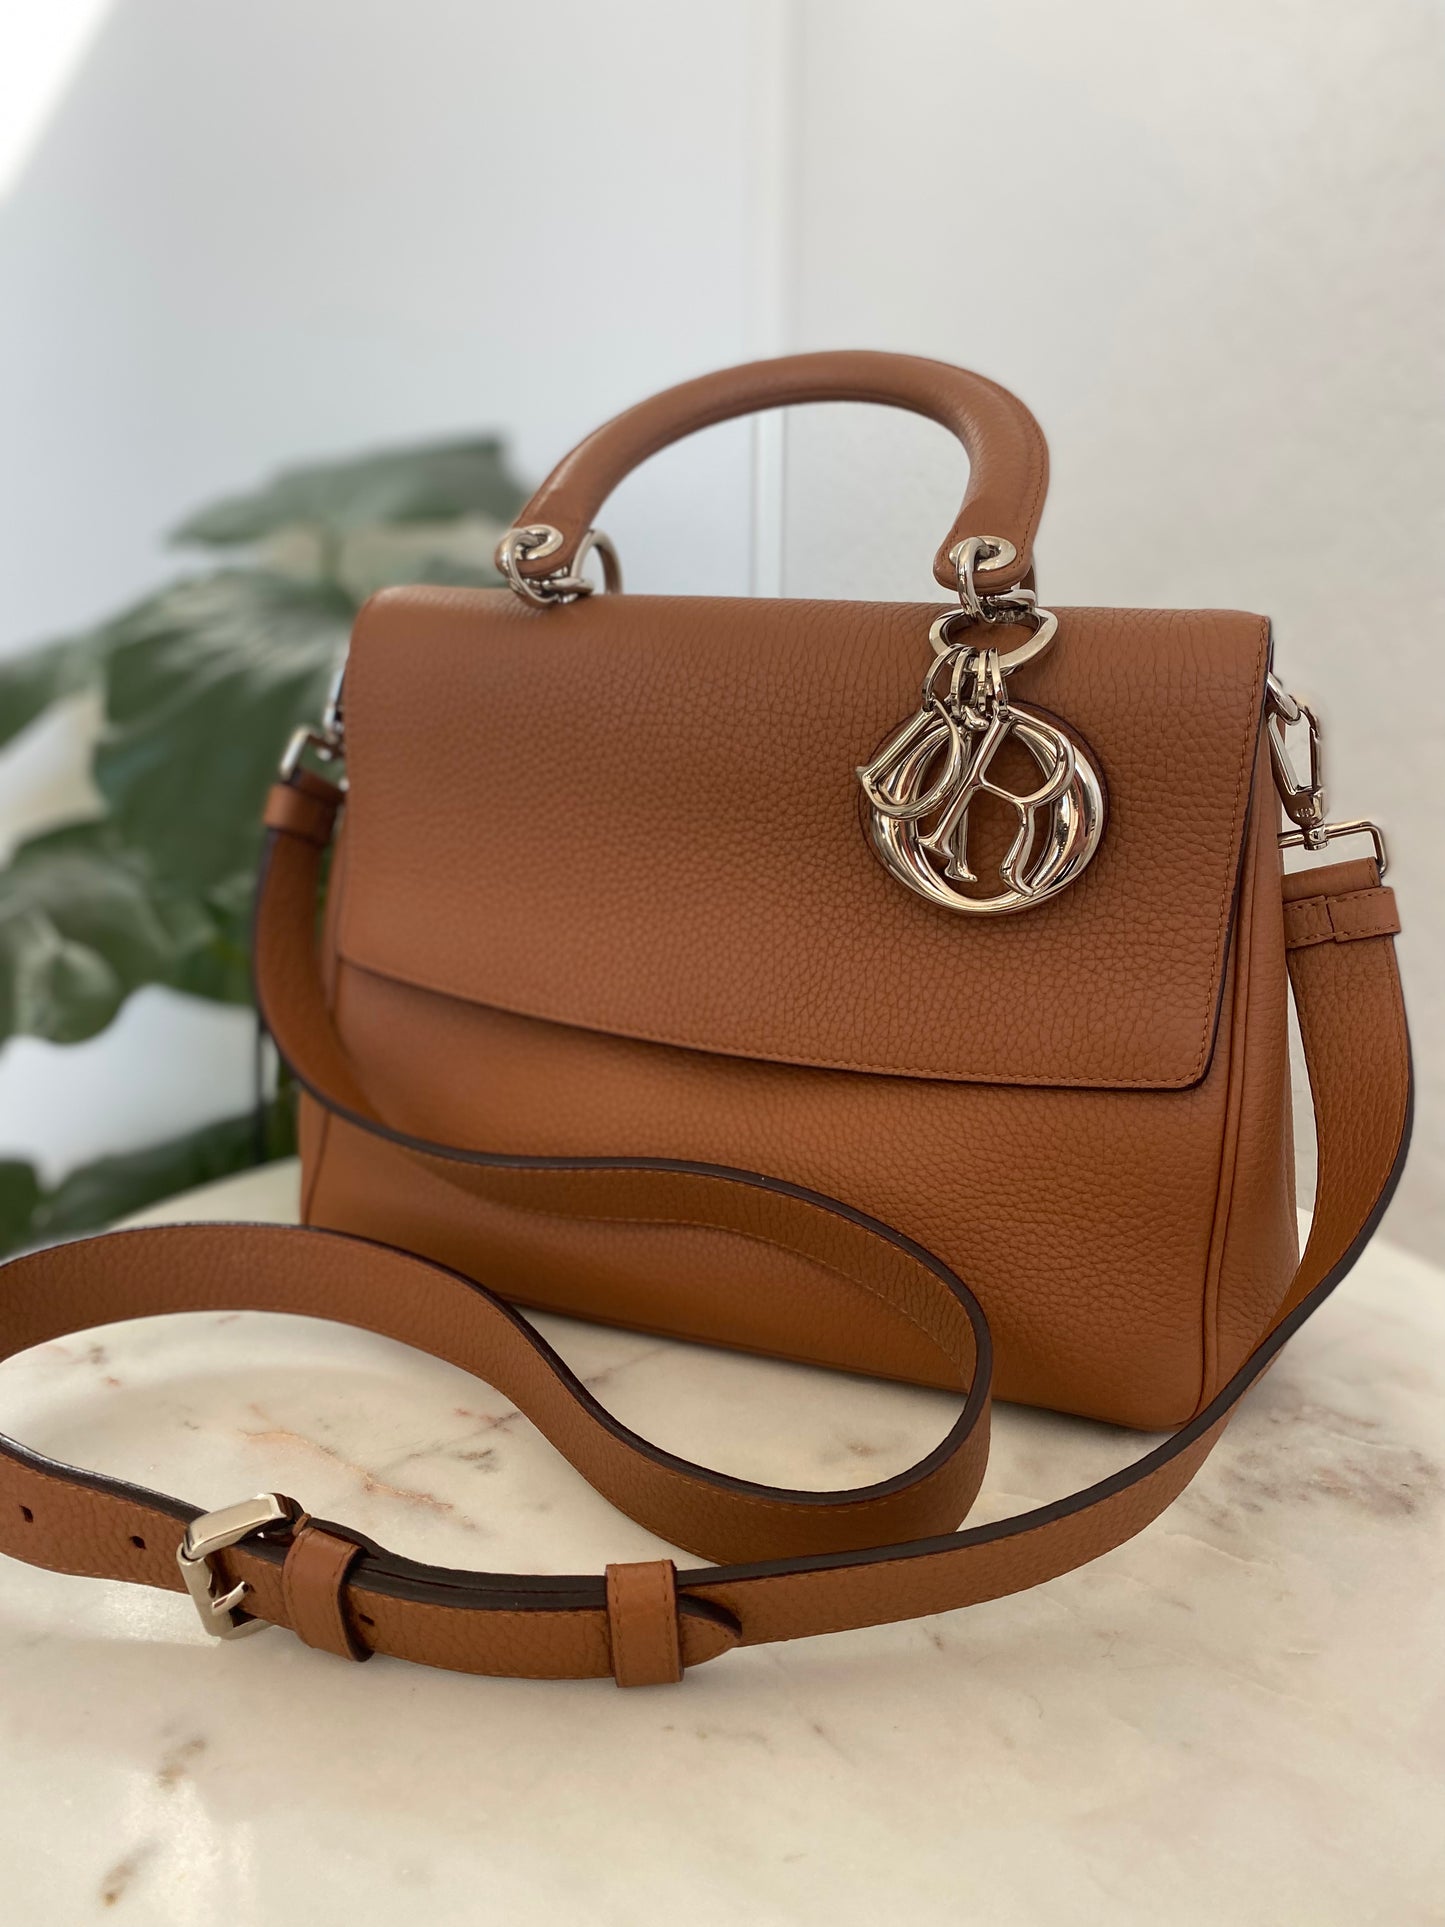 Christian Dior Be Dior Leather Satchel